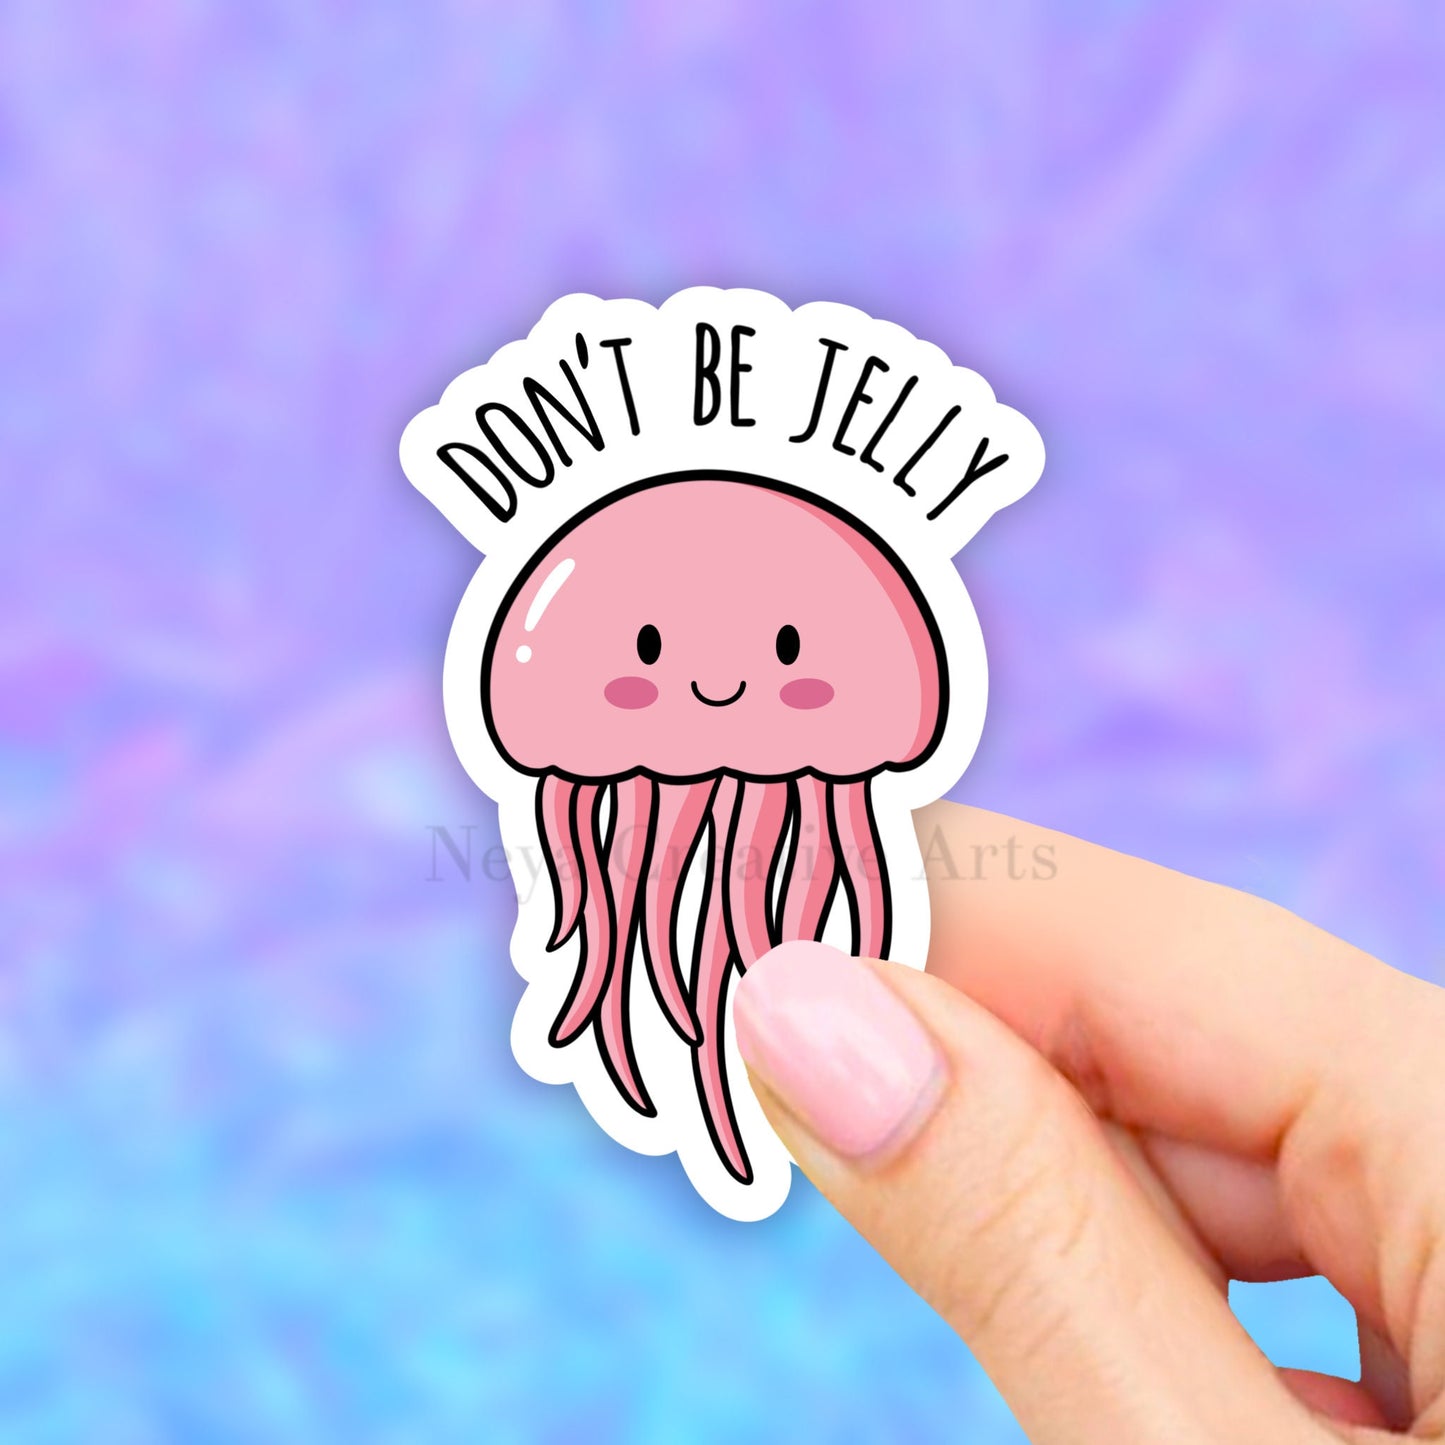 Don't Be Jelly Sticker, Jelly Fish Sticker, Laptop Decal, Vinyl